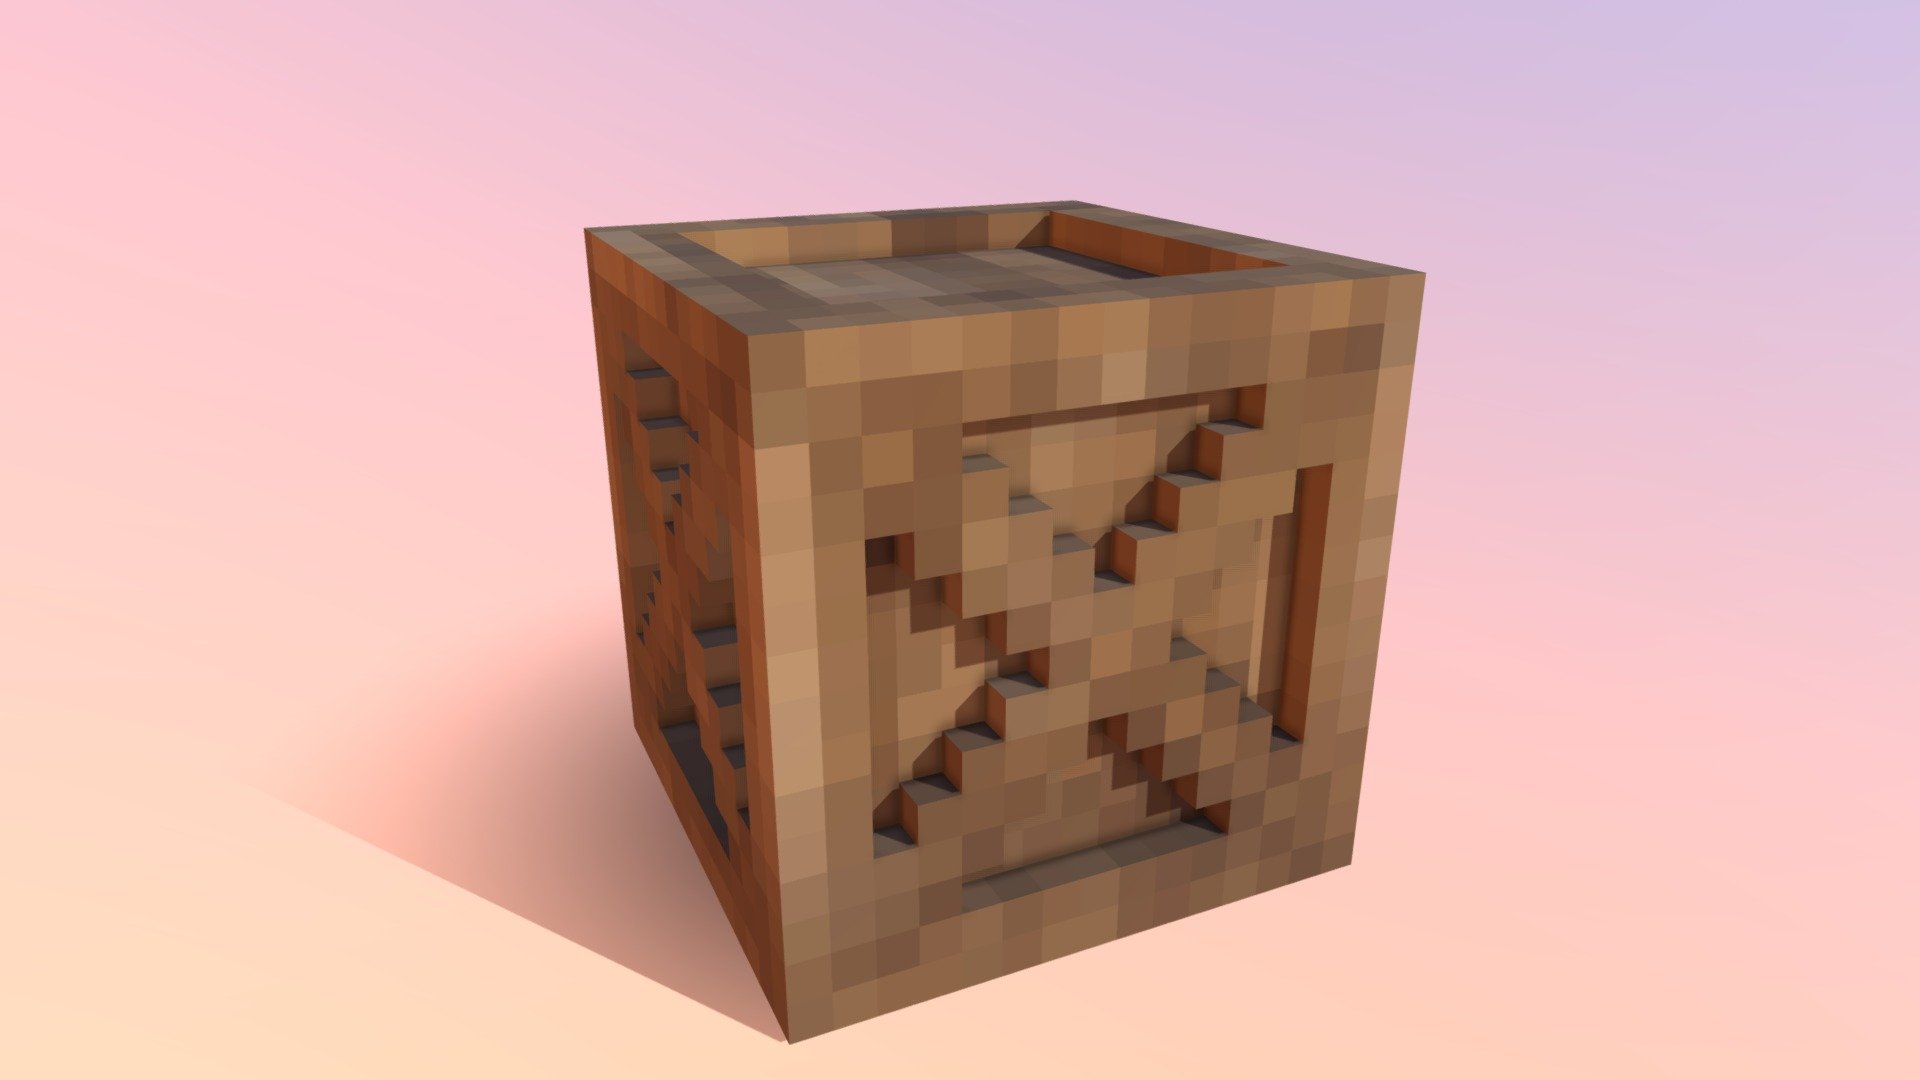 Voxel Crate

Upon purchase you will gain access to a ZIP file containing:

3D file in OBJ format
Material file in MTL format
Texture file in PNG format
Voxel file in VOX format - Voxel Crate - Buy Royalty Free 3D model by VoxMooph 3d model